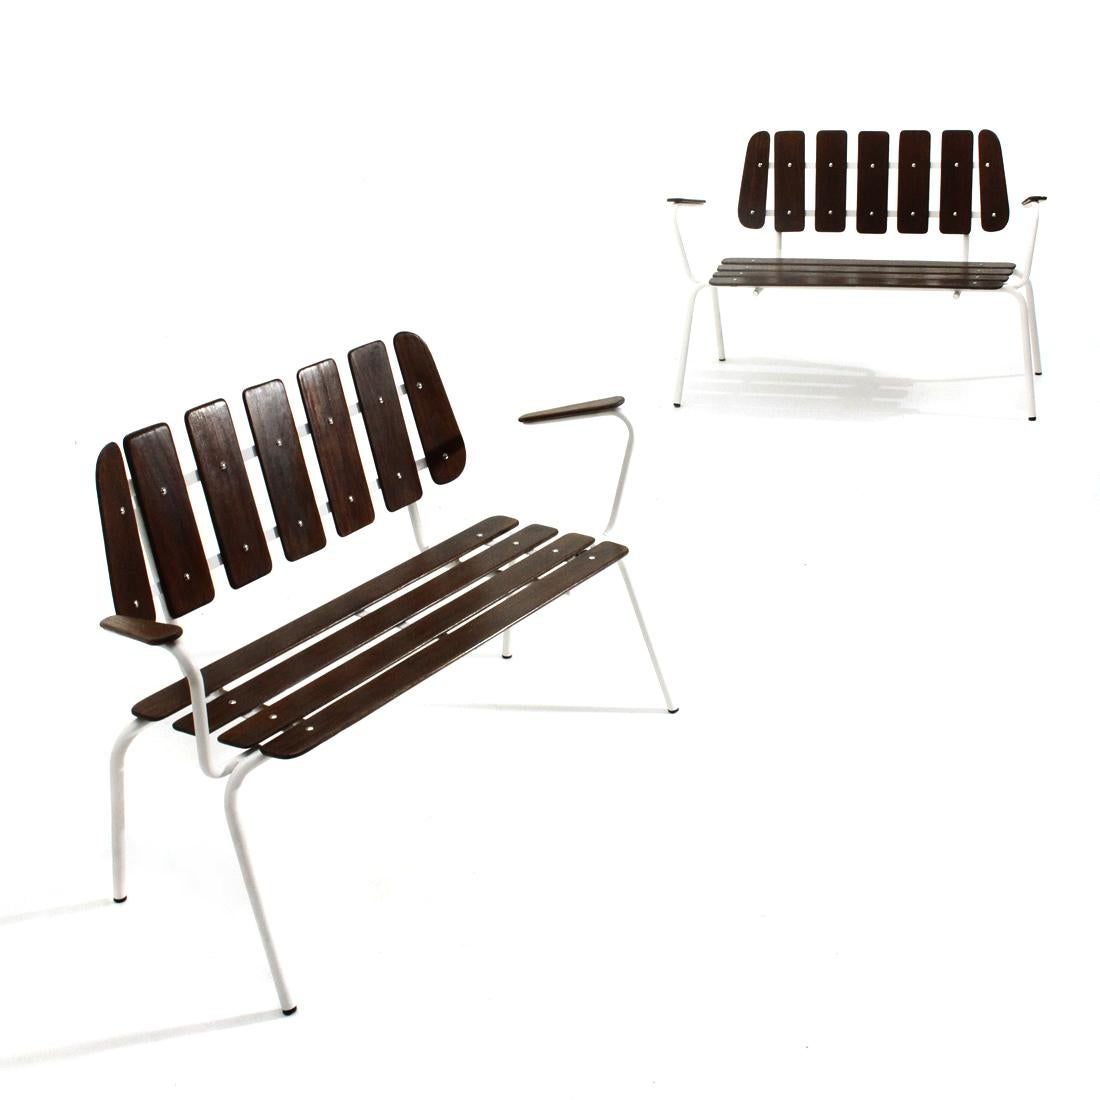 Mid-20th Century Pair of White Metal Benches with Wooden Slats, 1950s For Sale